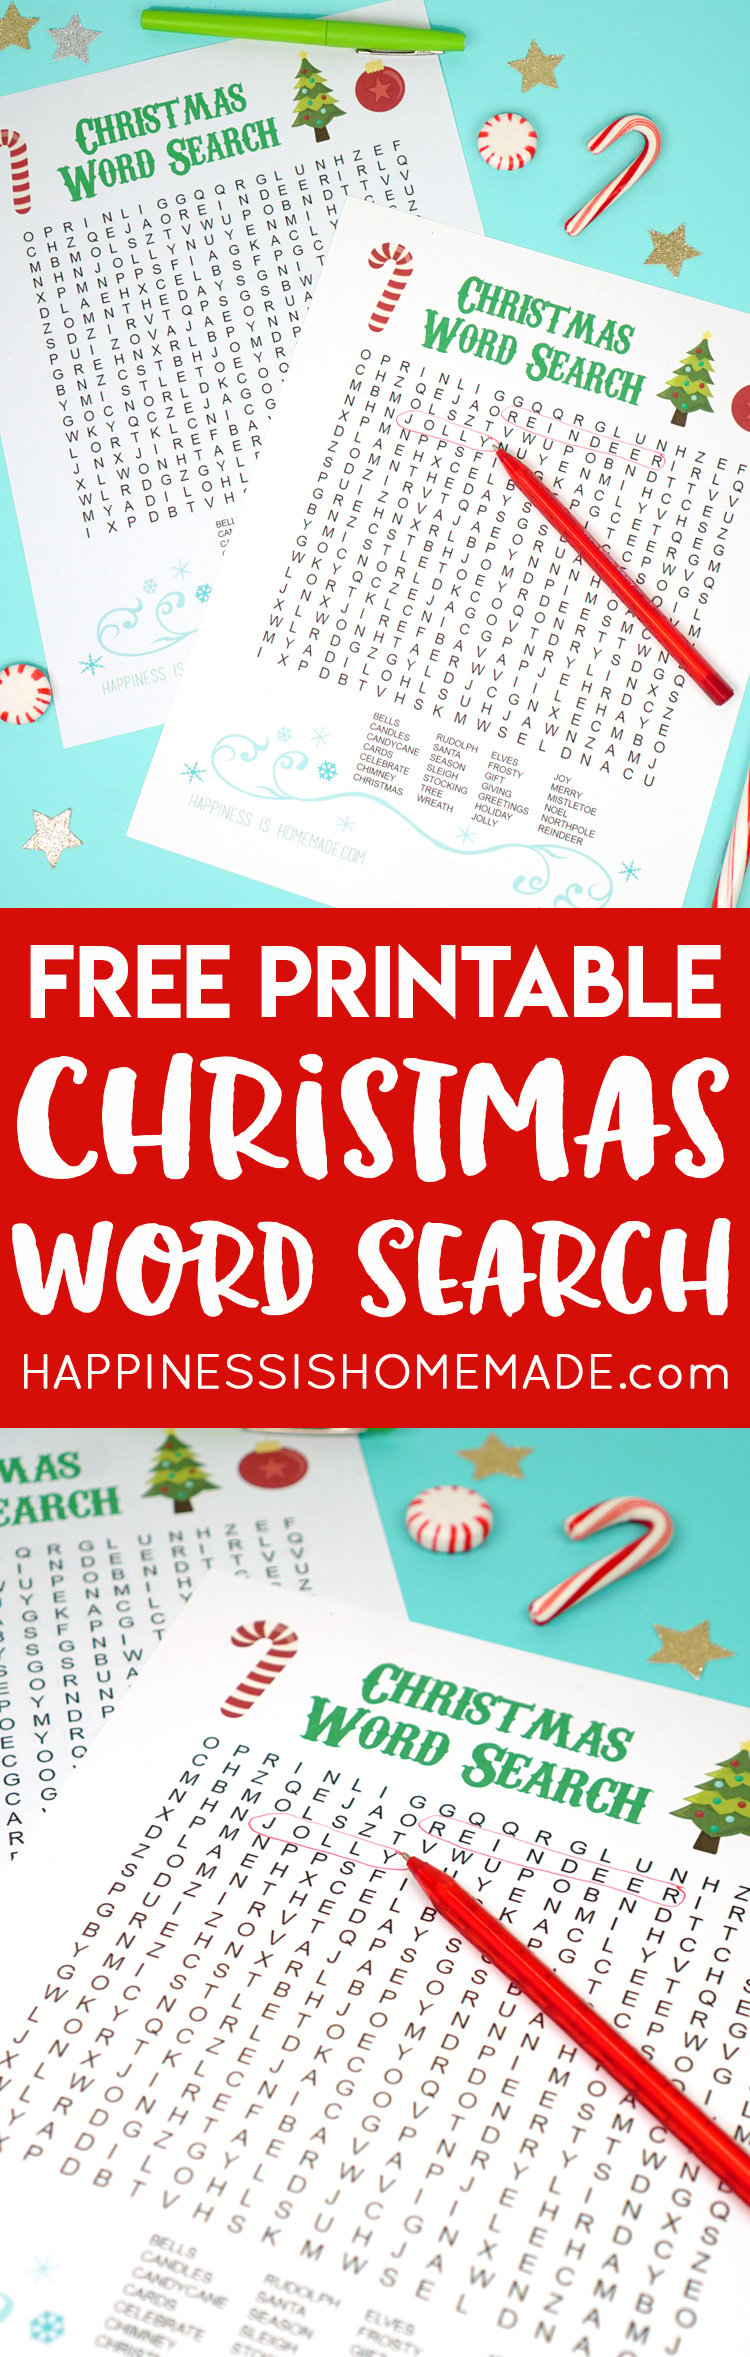 Free Printable Christmas Word Search for Kids and Adults